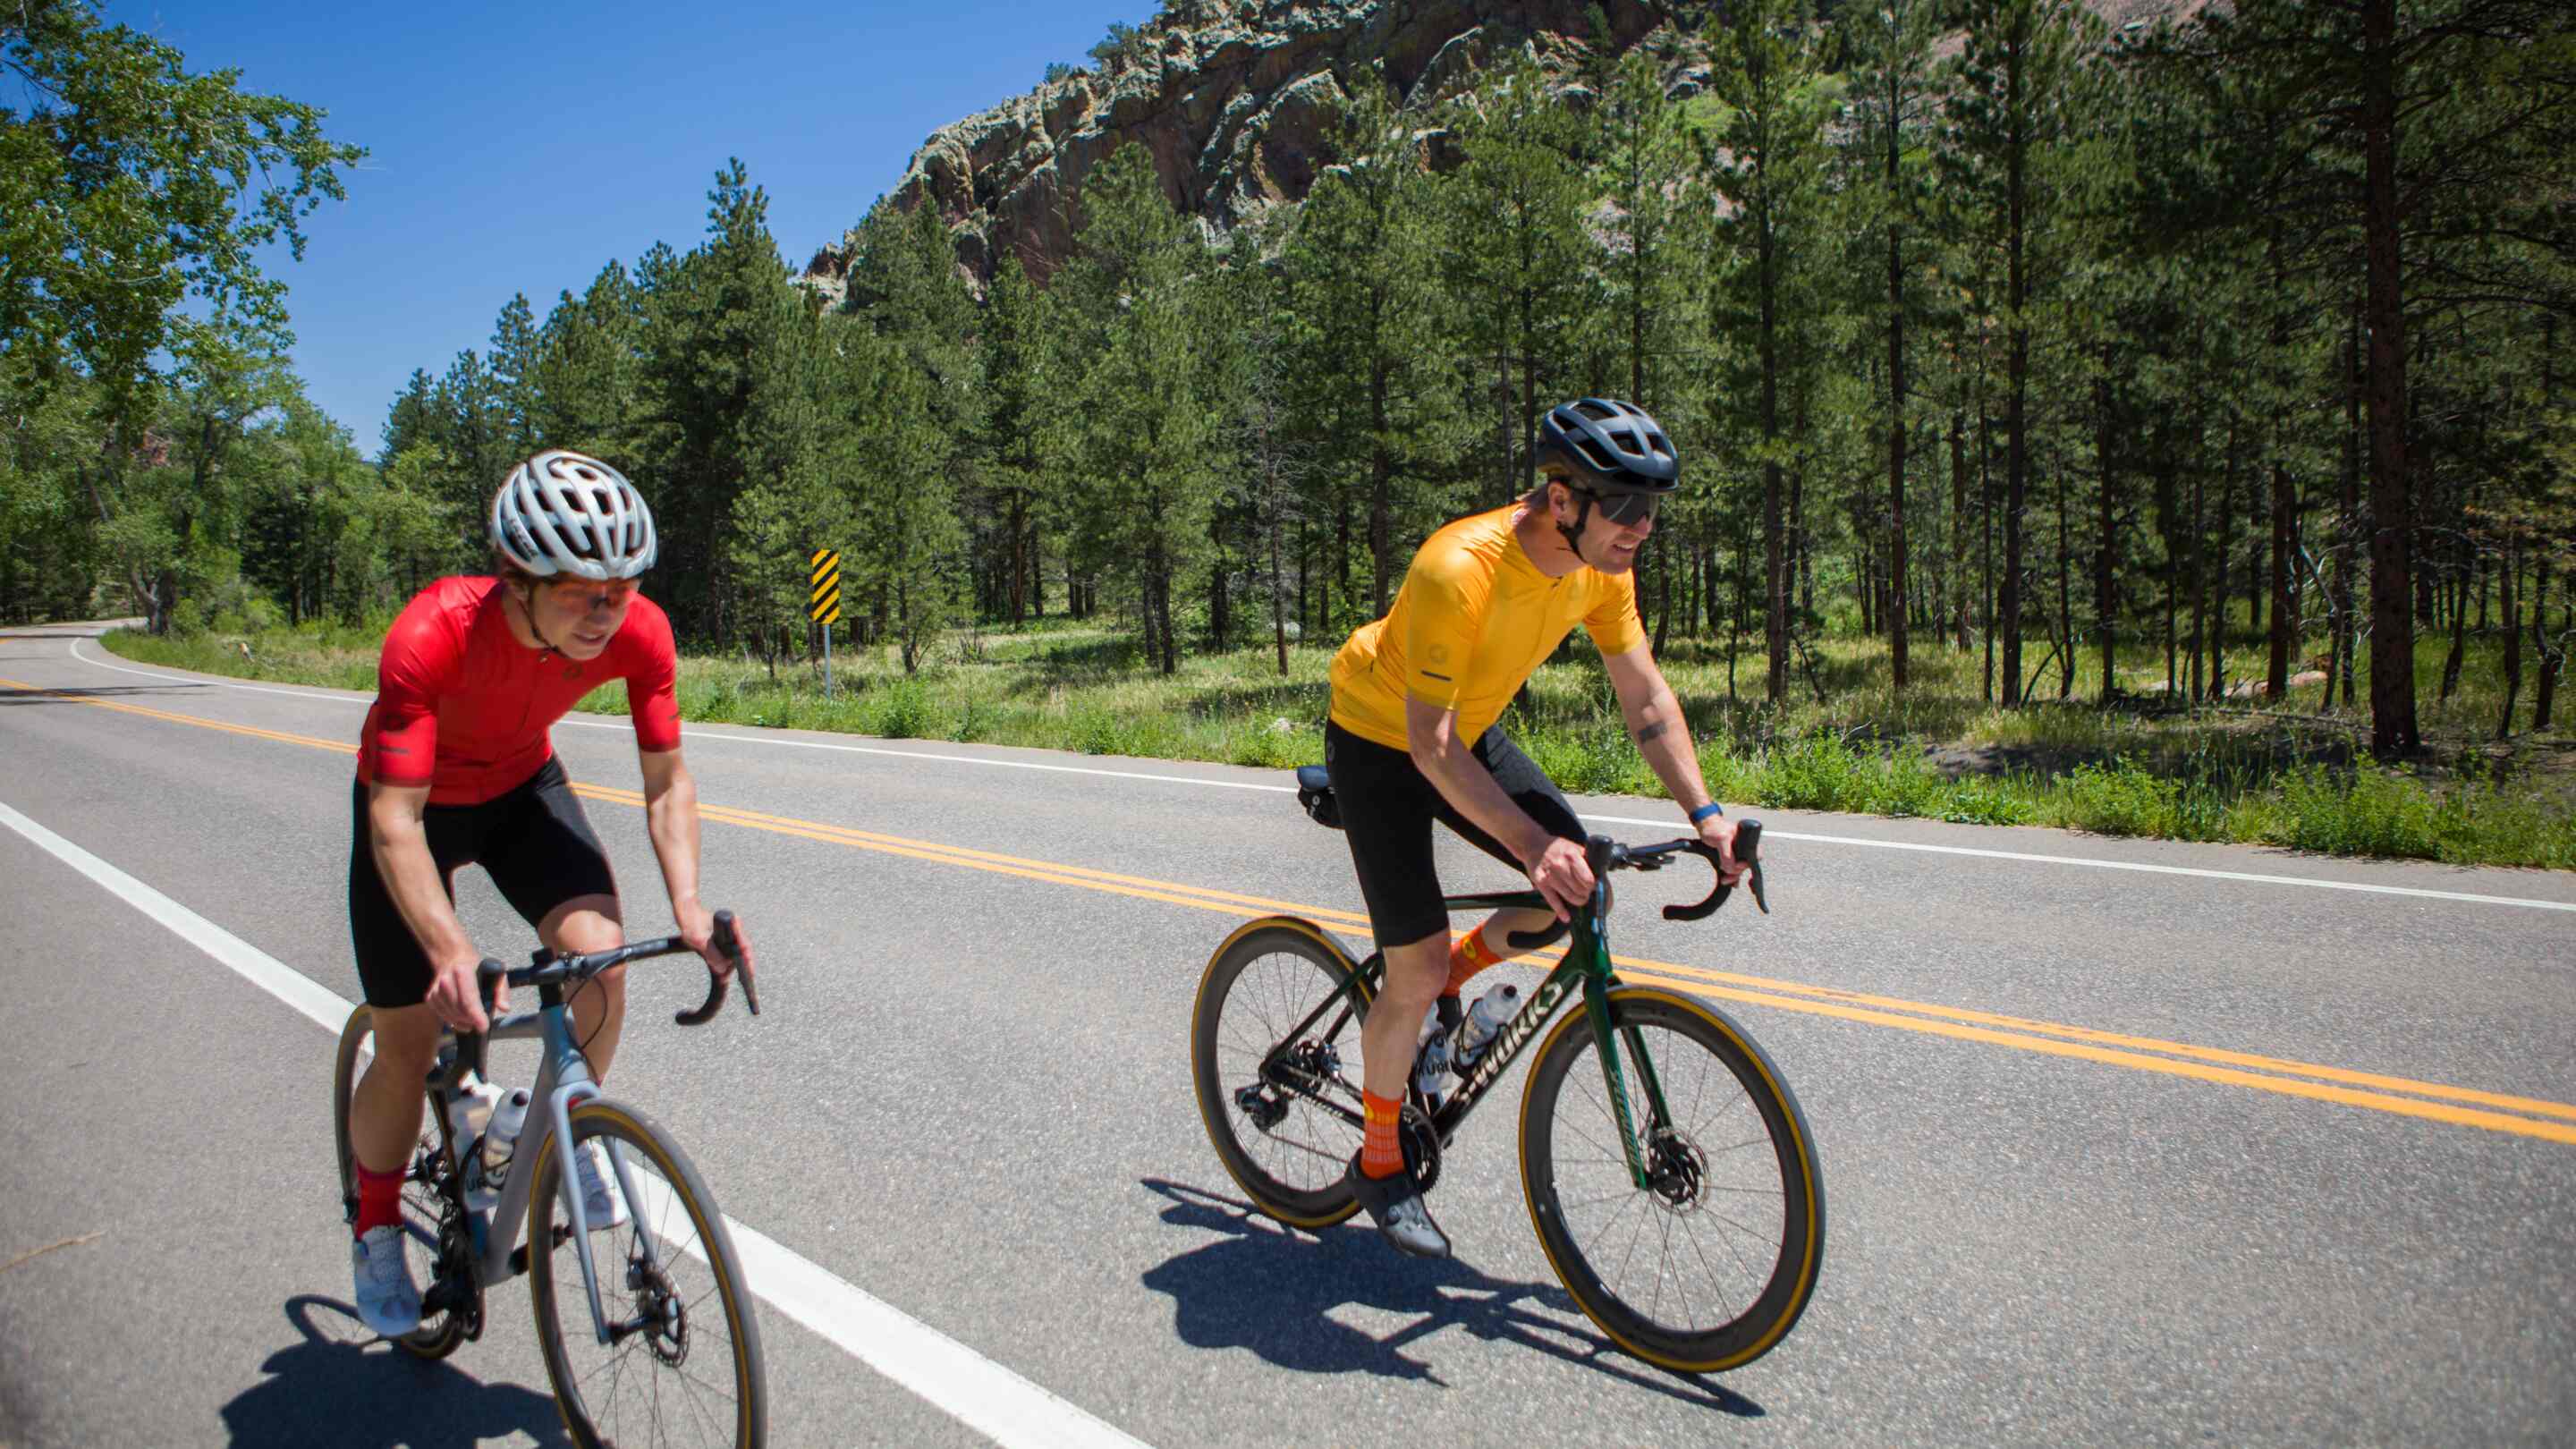 Pactimo's High End Summit Collection for Men and Women